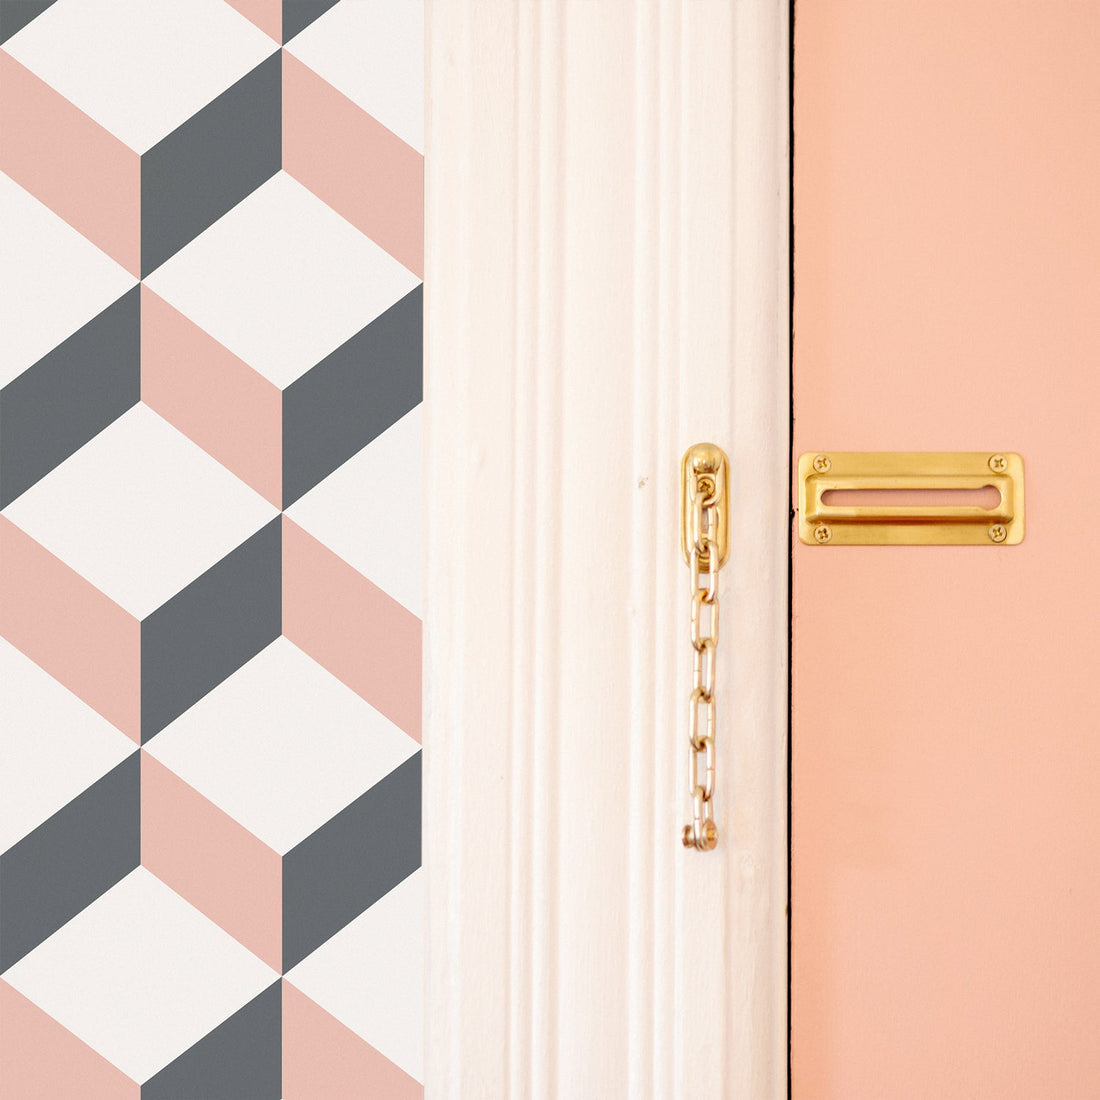 Modern cube design removable wallpaper in pink and grey colors for eclectic boho style entryway interior